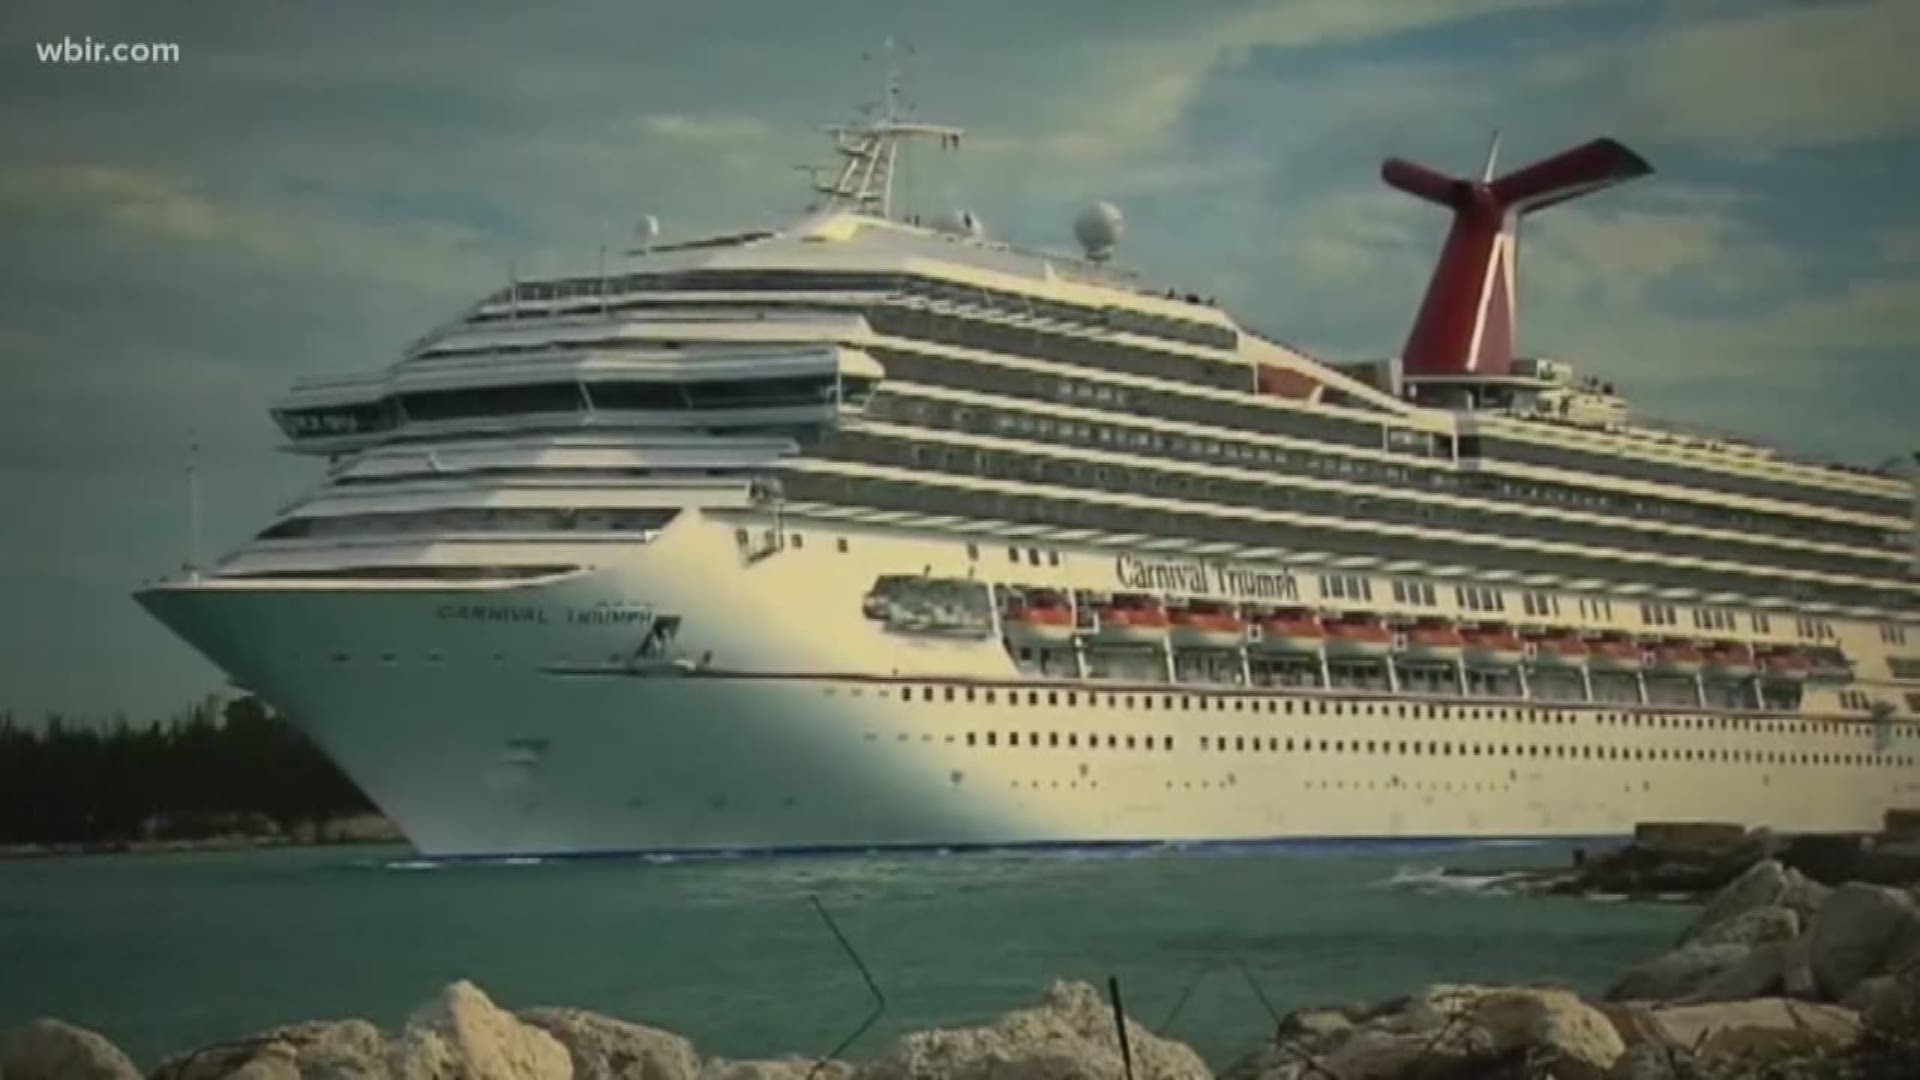 The couple was on a three day Caribbean Cruise--and found a hidden camera in their bedroom. They say the camera was pointed at their bed, and was wired up and working.